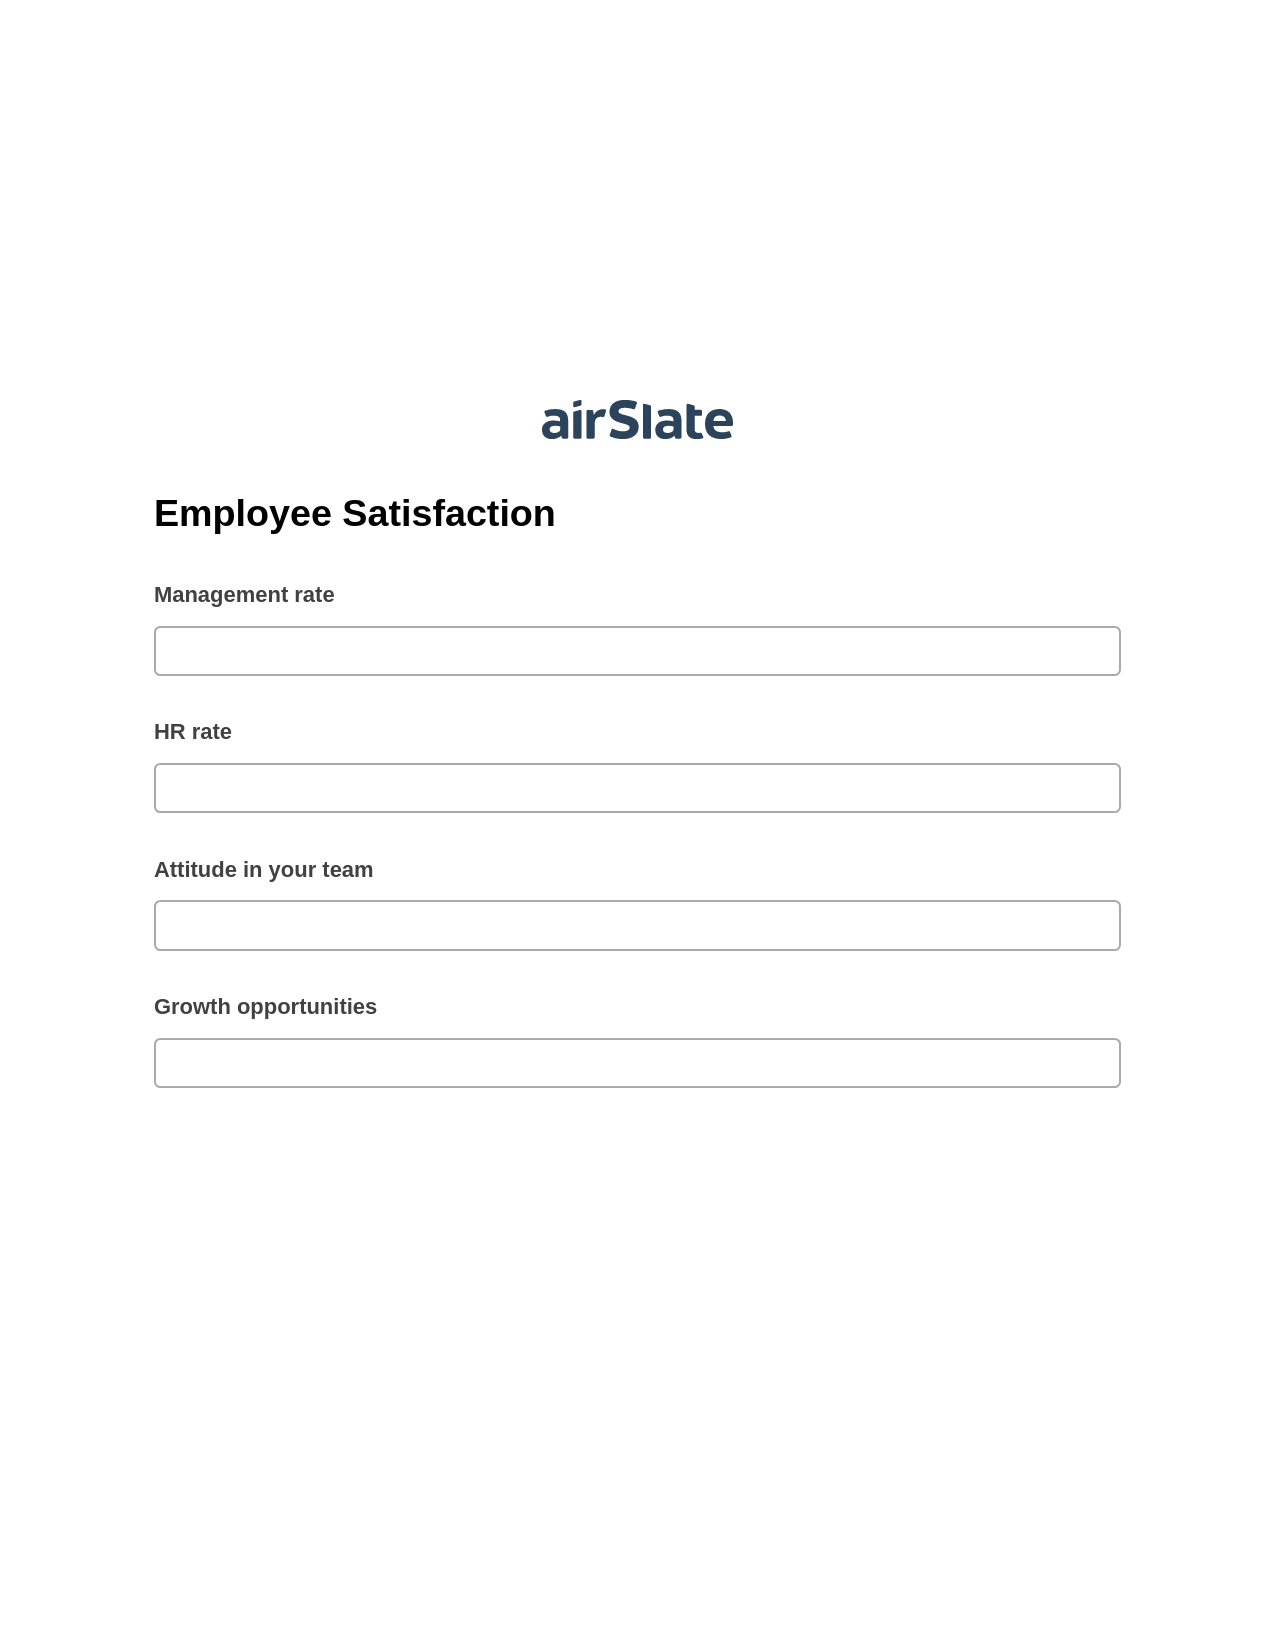 Employee Satisfaction Pre-fill from CSV File Bot, Document Hide Bot, Export to MySQL Bot